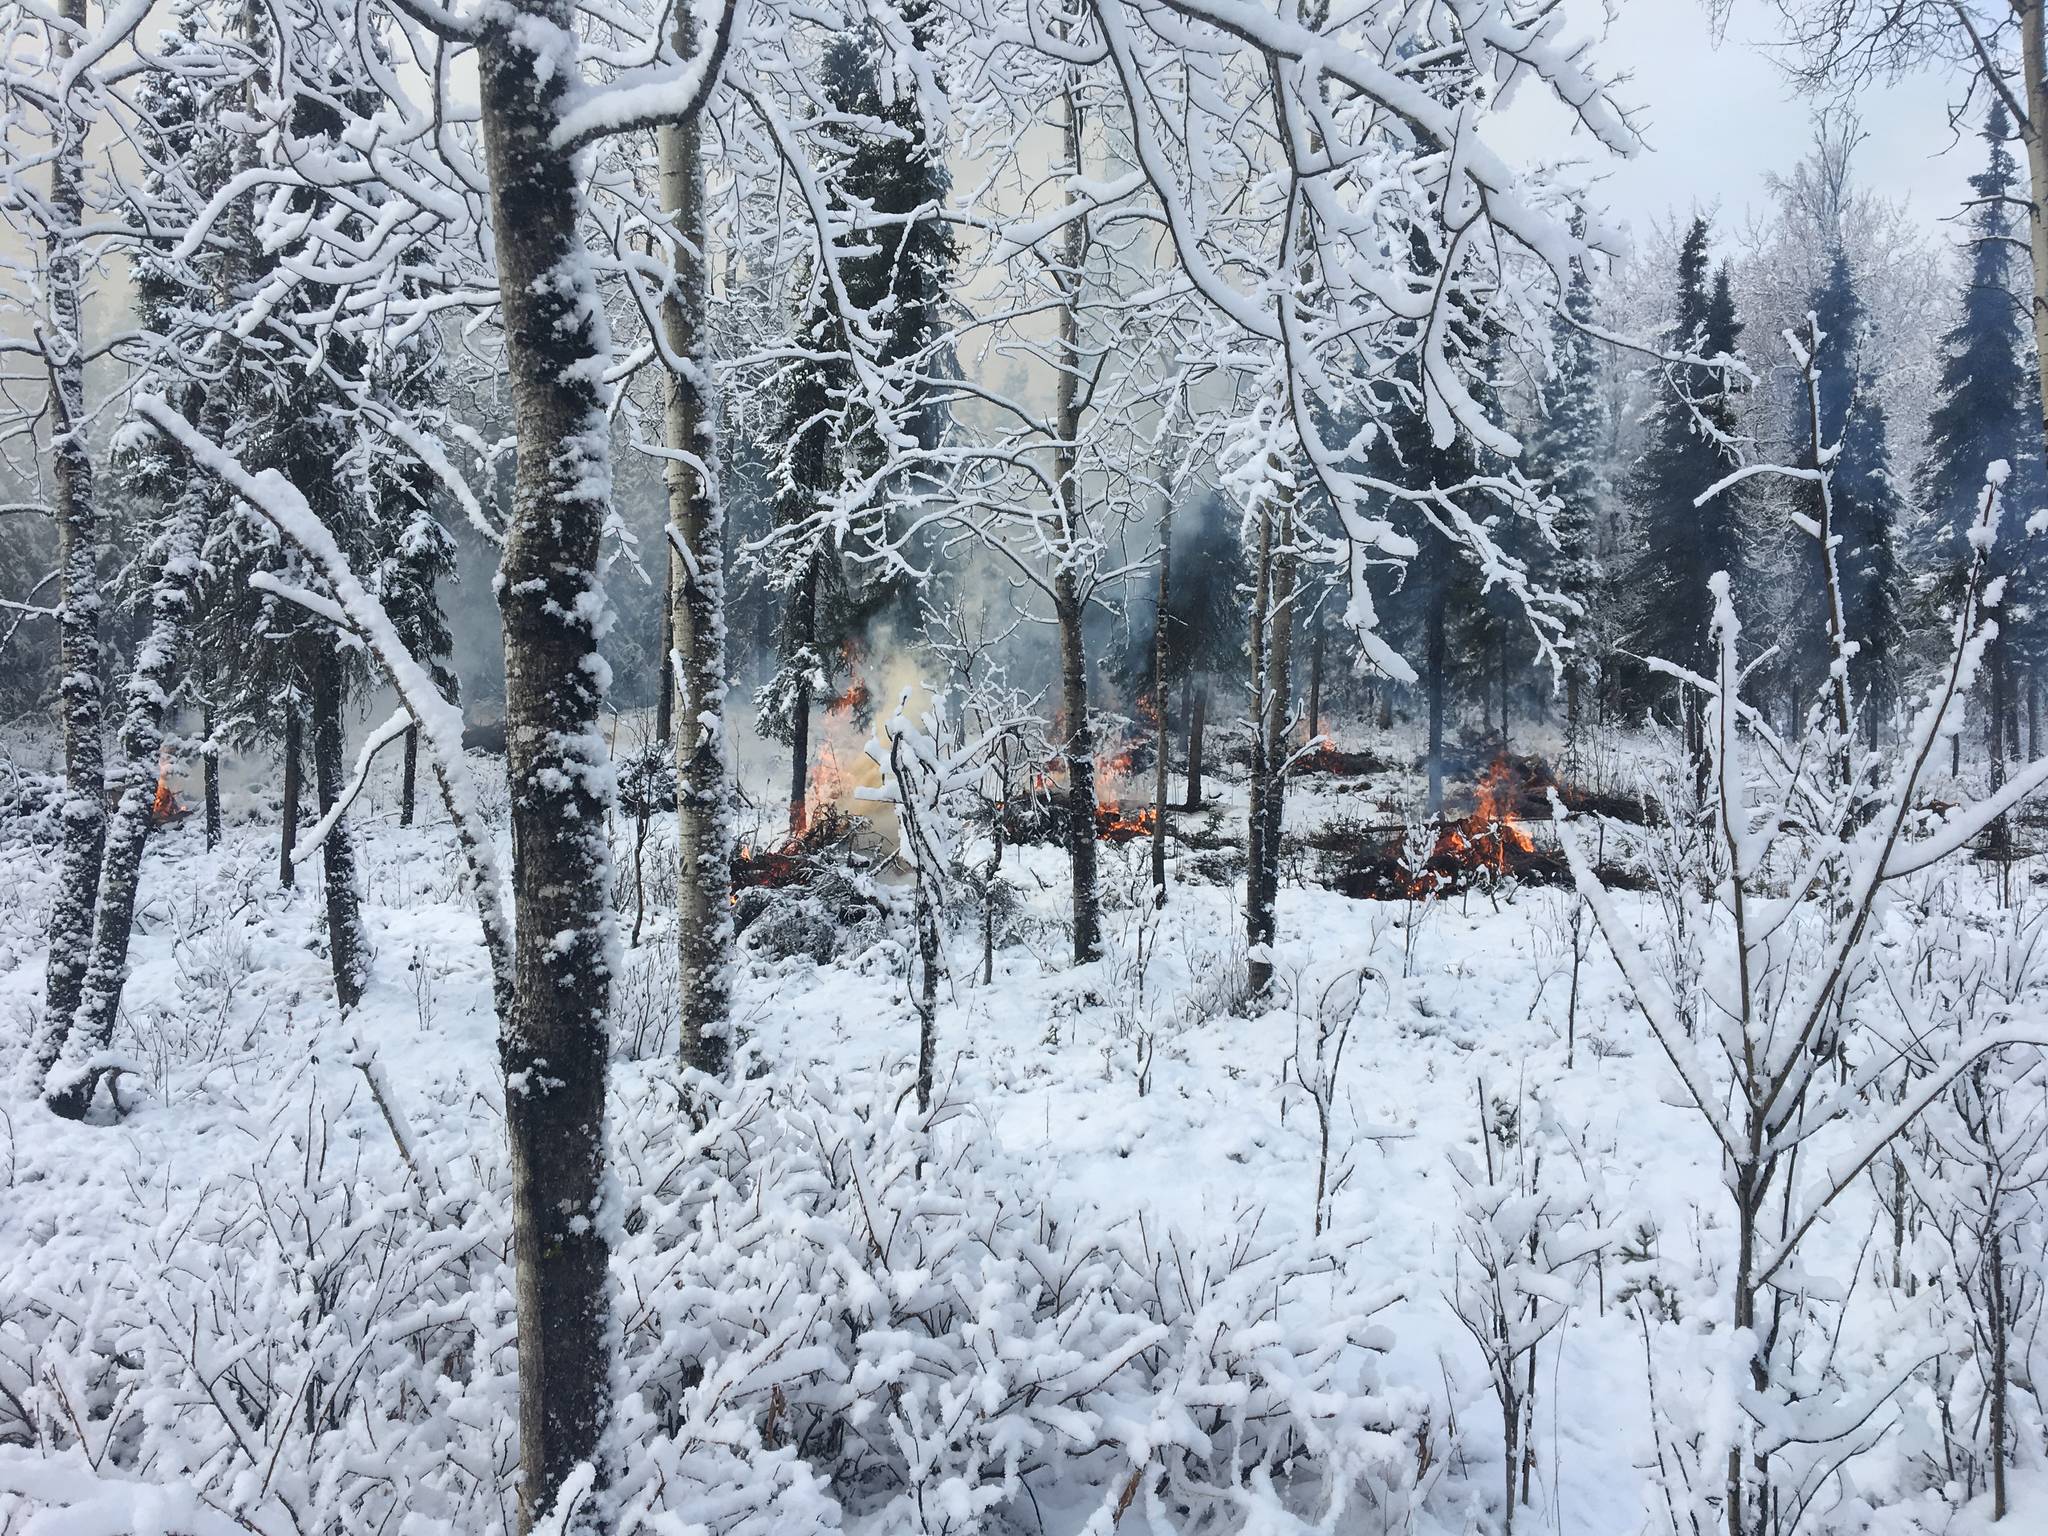 A fire burns as part of a fire management plan at the Kenai National Wildlife Refuge in 2016. Fire officials are conducting prescribed burns to reduce wildfire risk at the refuge this week. (Photo courtesy of the U.S. Fish and Wildlife Service)